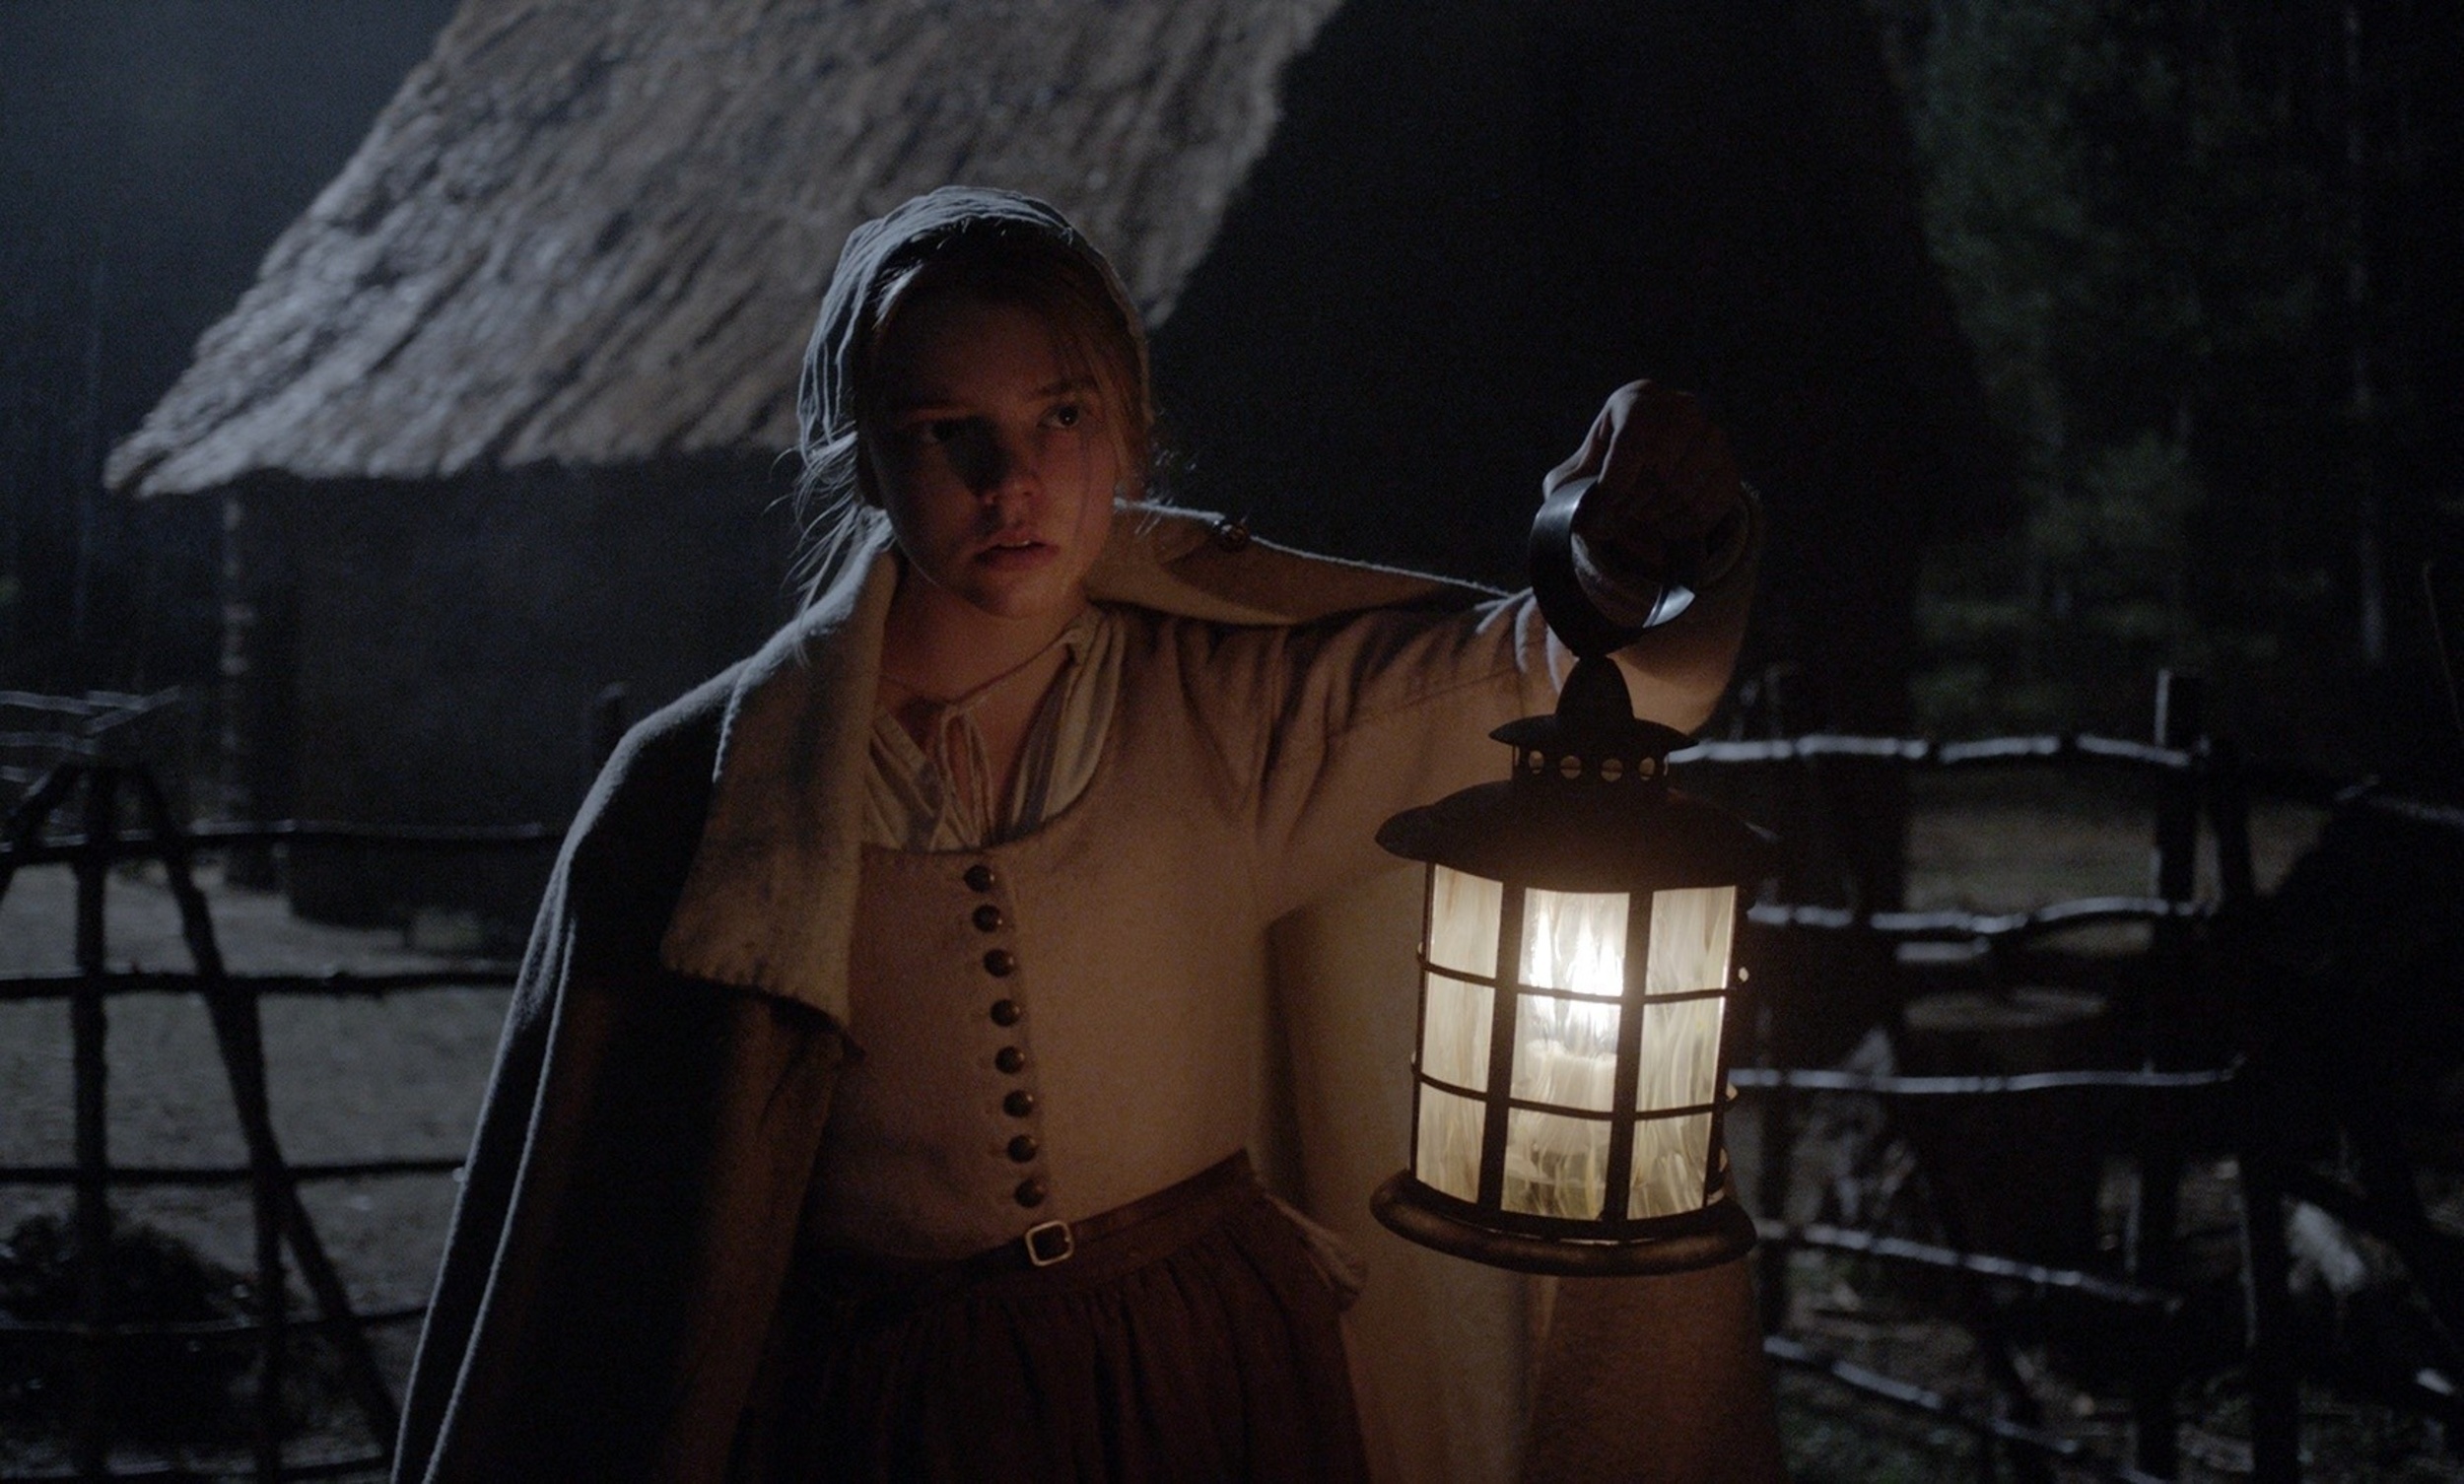 <p>Robert Eggers began his feature film career with a bang with <span><em>The Witch</em>, </span>a film that manages to be dark fantasy and horror. Set during the earliest days of American colonialism, its story about a family of English settlers who are banished to the woods, where they confront the presence of a malevolent witch, feels like a sinister bedtime story. Anya Taylor-Joy gives a particularly remarkable performance as Thomasin, the girl whose life and identity become increasingly intertwined with that of the mysterious witch. Its combination of historical detail and mystical elements elevates this film into the realm of truly great dark fantasy horror.</p><p>You may also like: <a href='https://www.yardbarker.com/entertainment/articles/20_unforgettable_moments_in_live_television_history_030124/s1__35260103'>20 unforgettable moments in live television history</a></p>